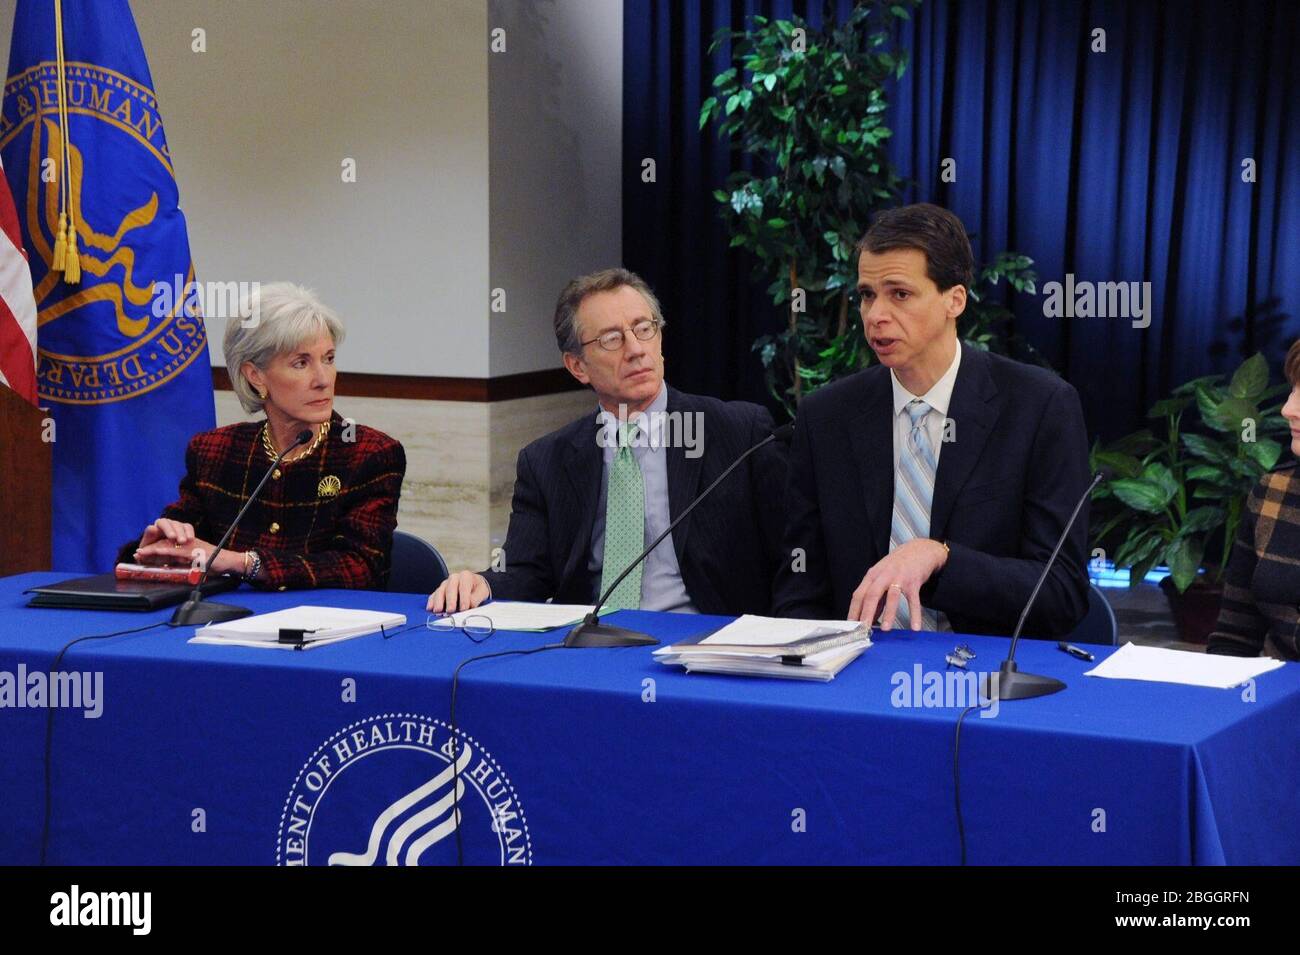 HHS Secretary Kathleen Sebelius, Director of the Office of Consumer Information and Insurance Oversight Jay Angoff and Rhode Island Health Insurance Commissioner Christopher F. Koller at a press conference. Stock Photo